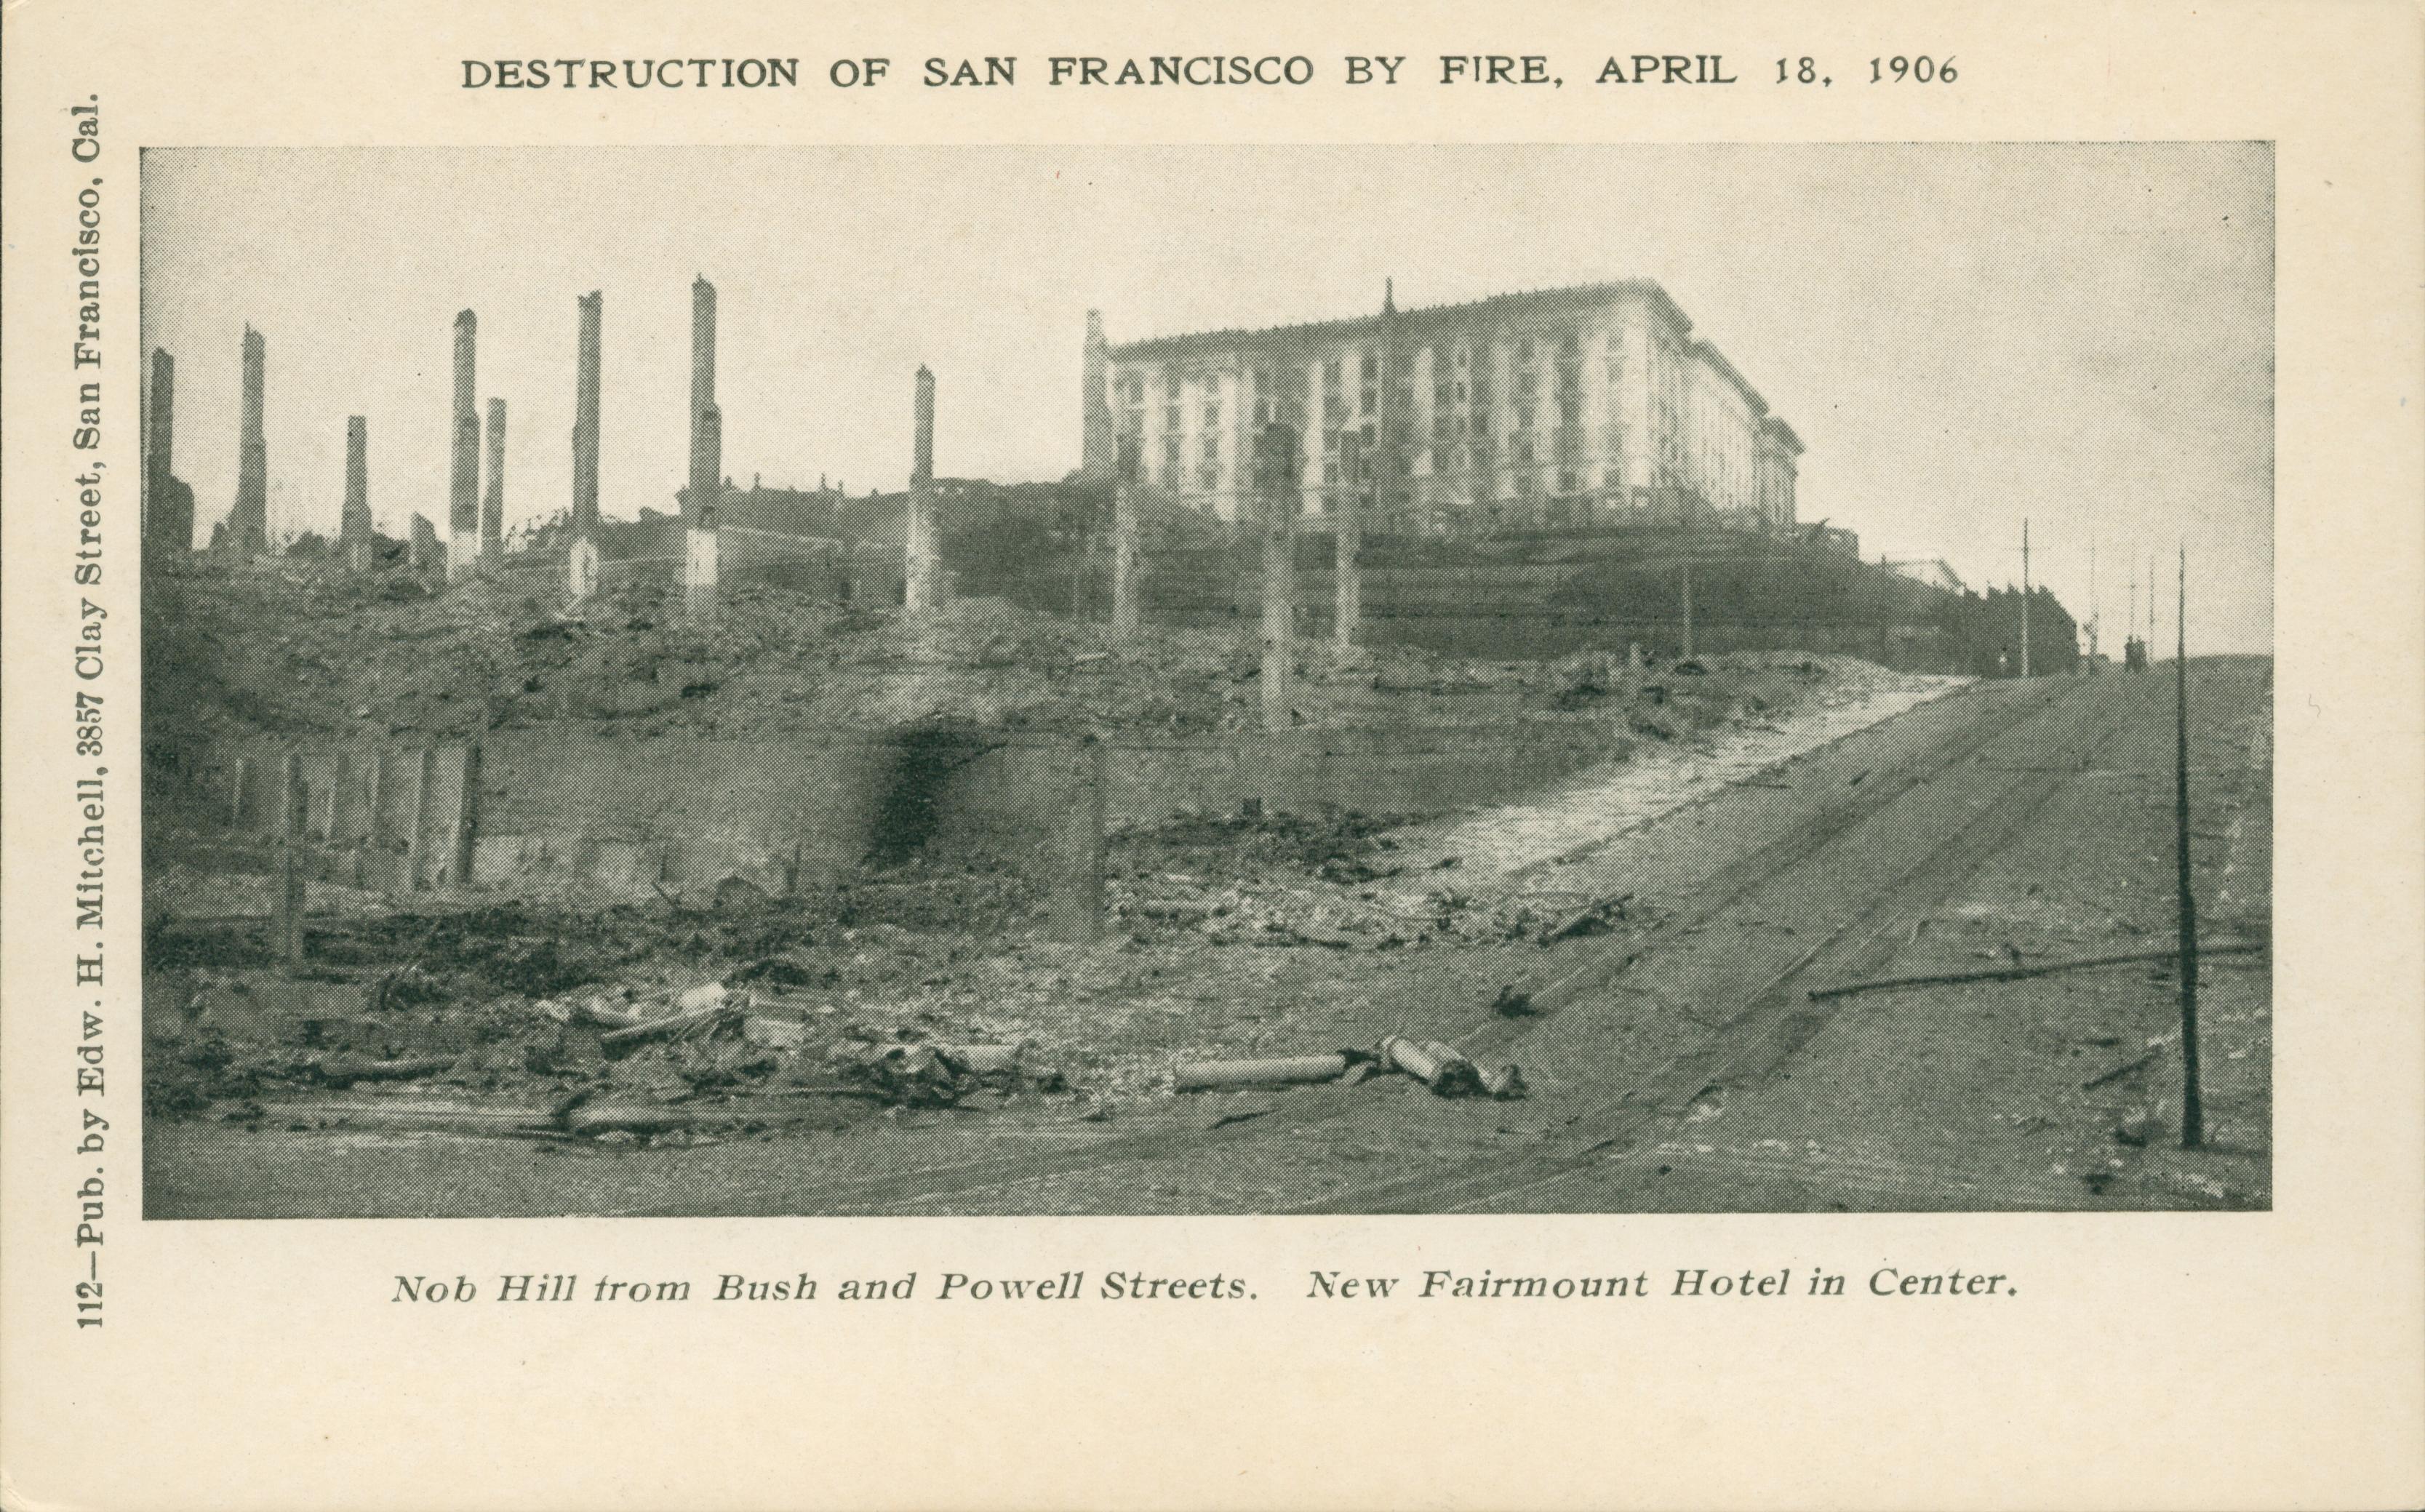 Shows the Fairmont Hotel on Nob Hill above several destroyed buildings.